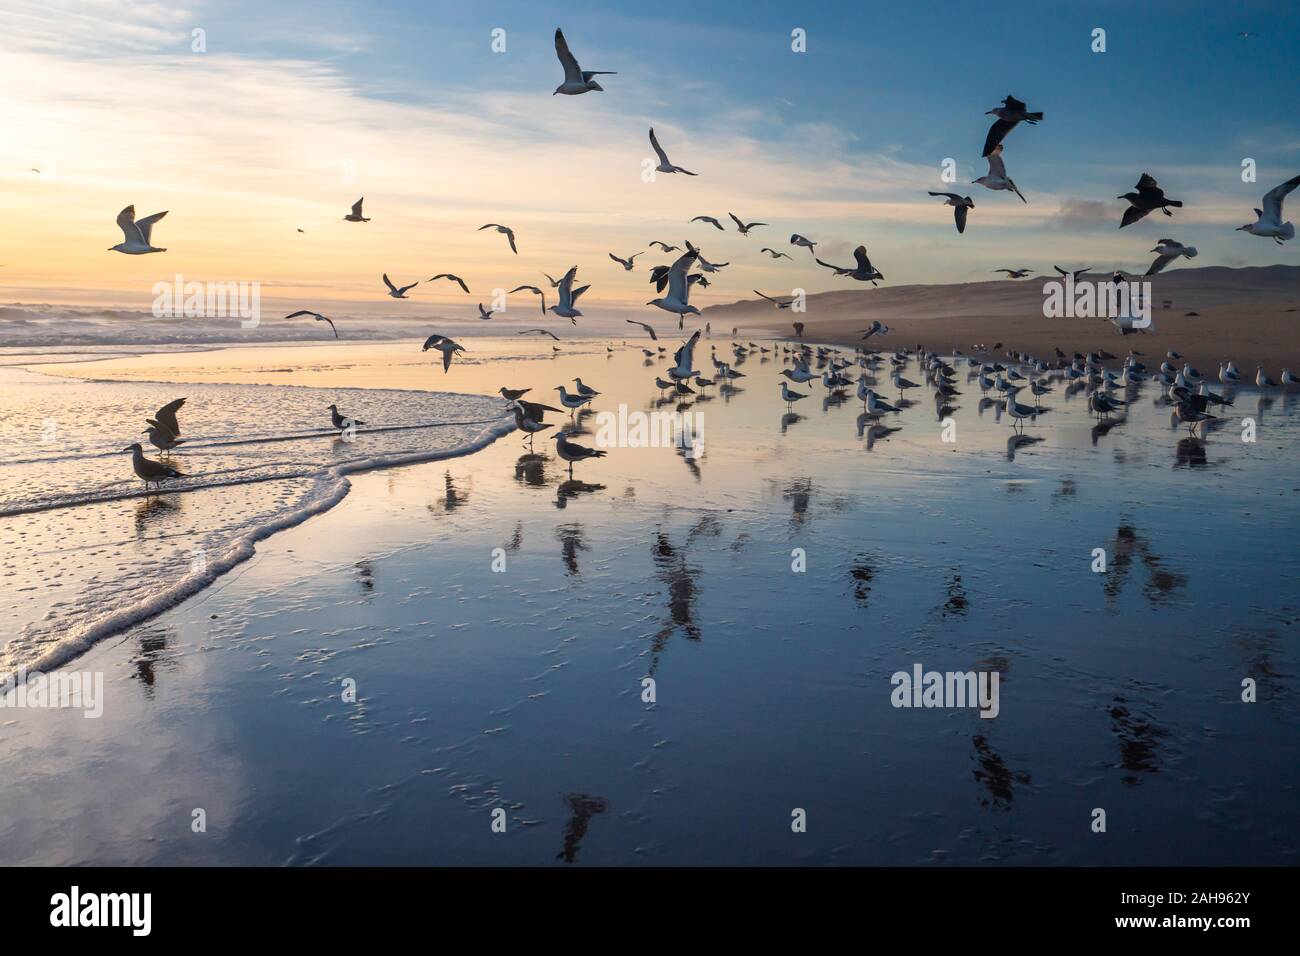 Sunset on the beach and flock of flying birds Stock Photo